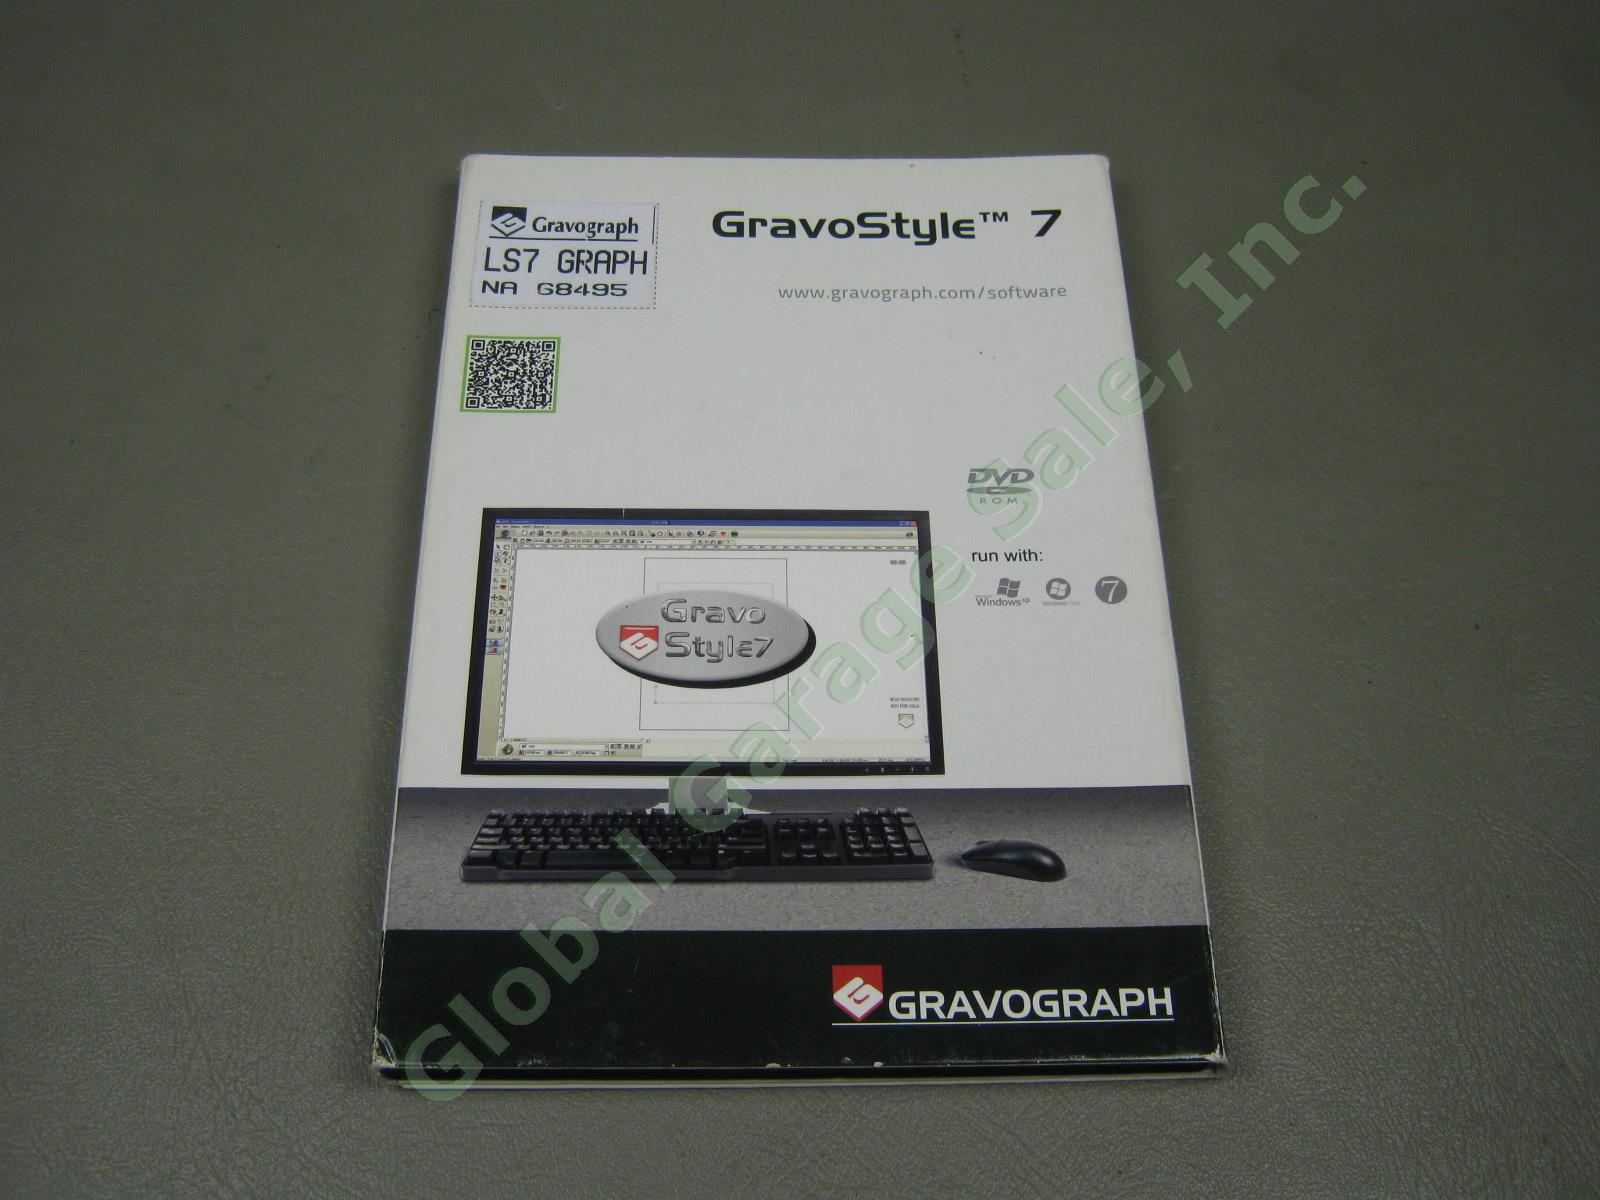 Gravograph GravoStyle 7 Full Graphic Level Engraving Machine Software W/ Dongle+ 5